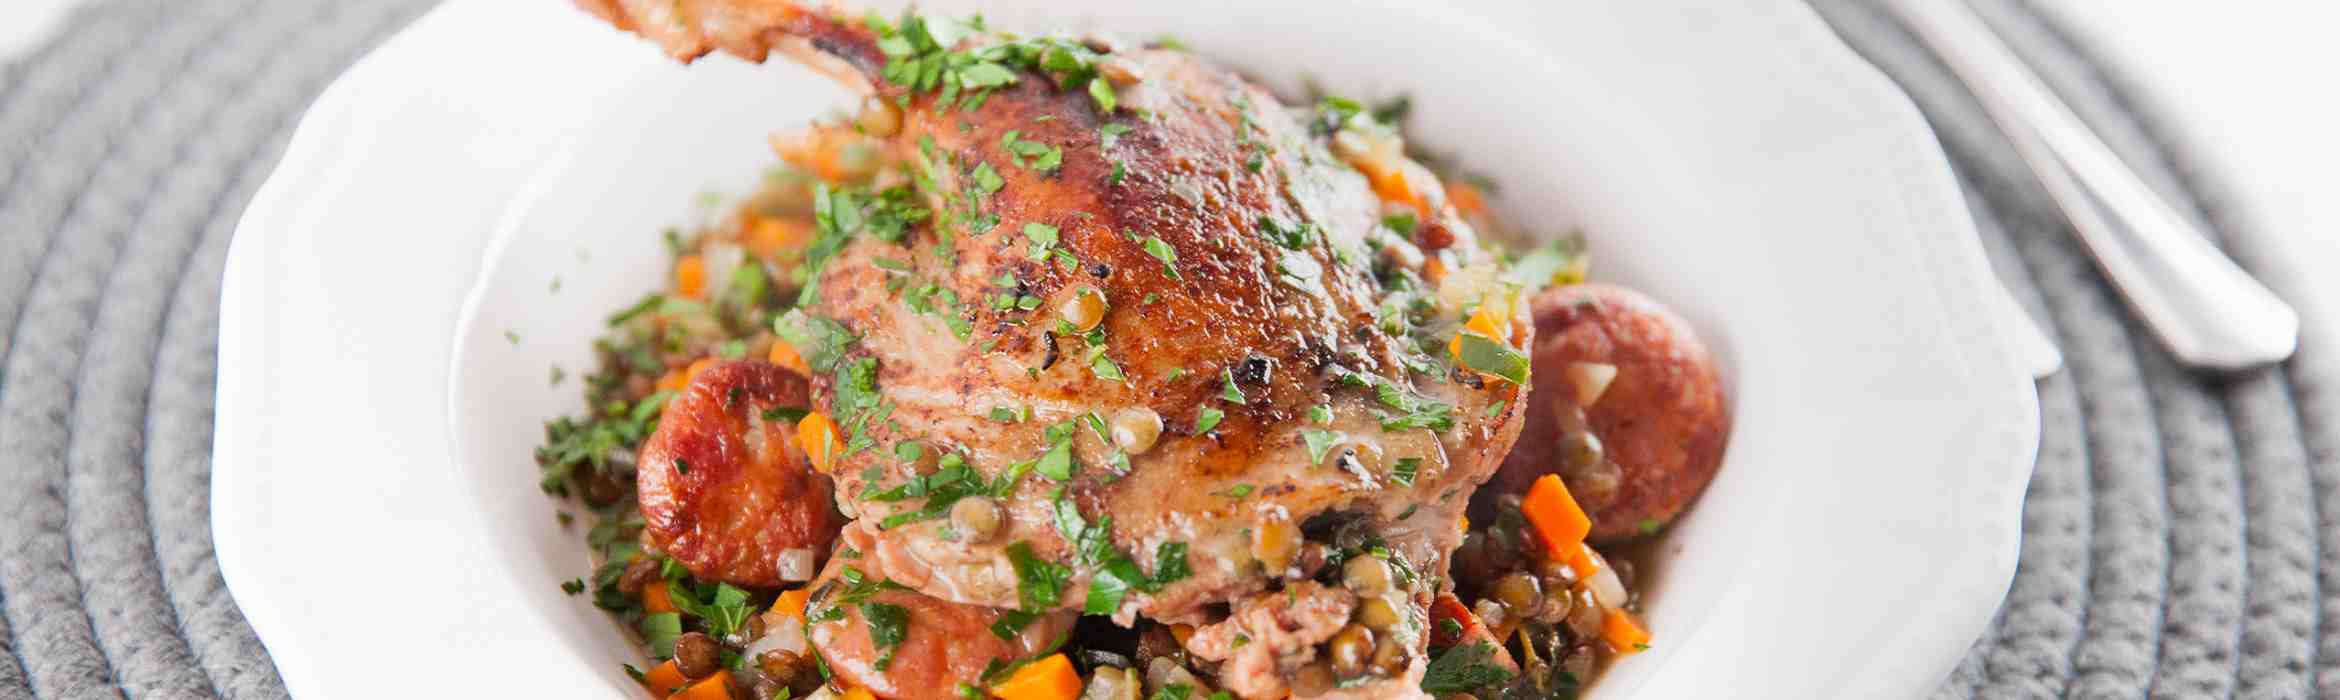 Confit Duck with Chorizo, Speck and Lentils Recipe